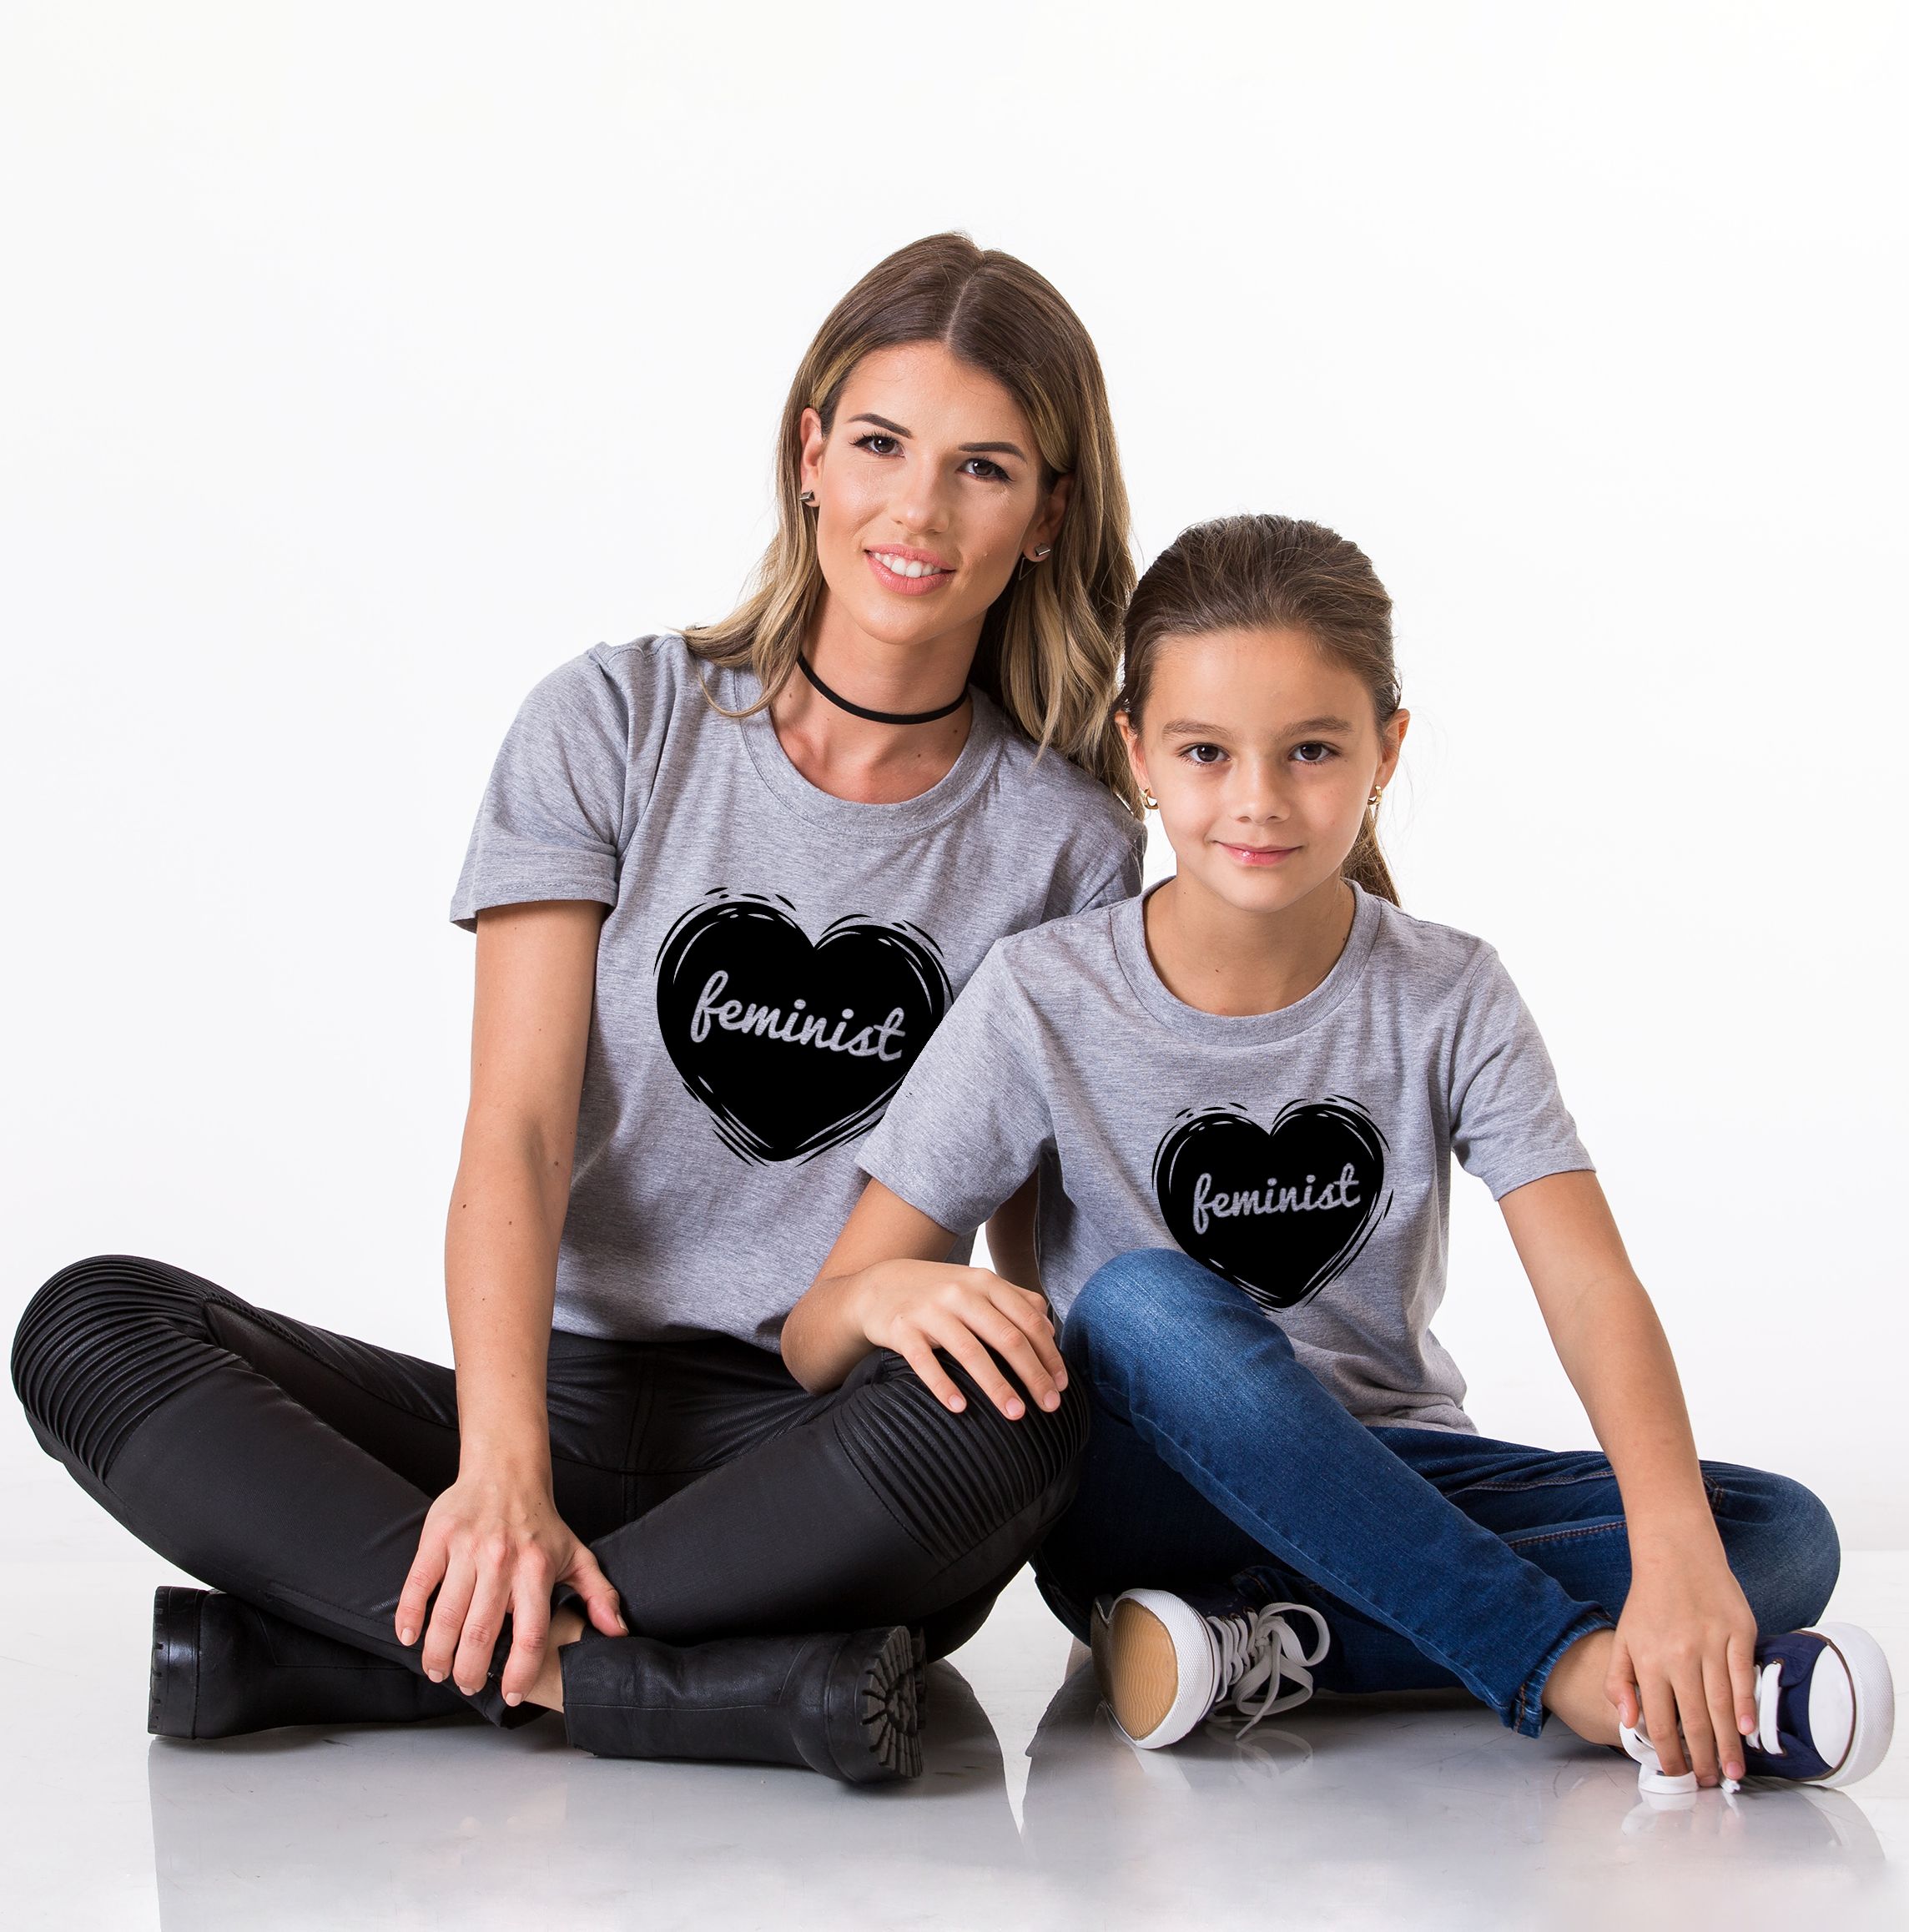 Mommy and Me Feminist Shirts, Matching Mother Daughter.